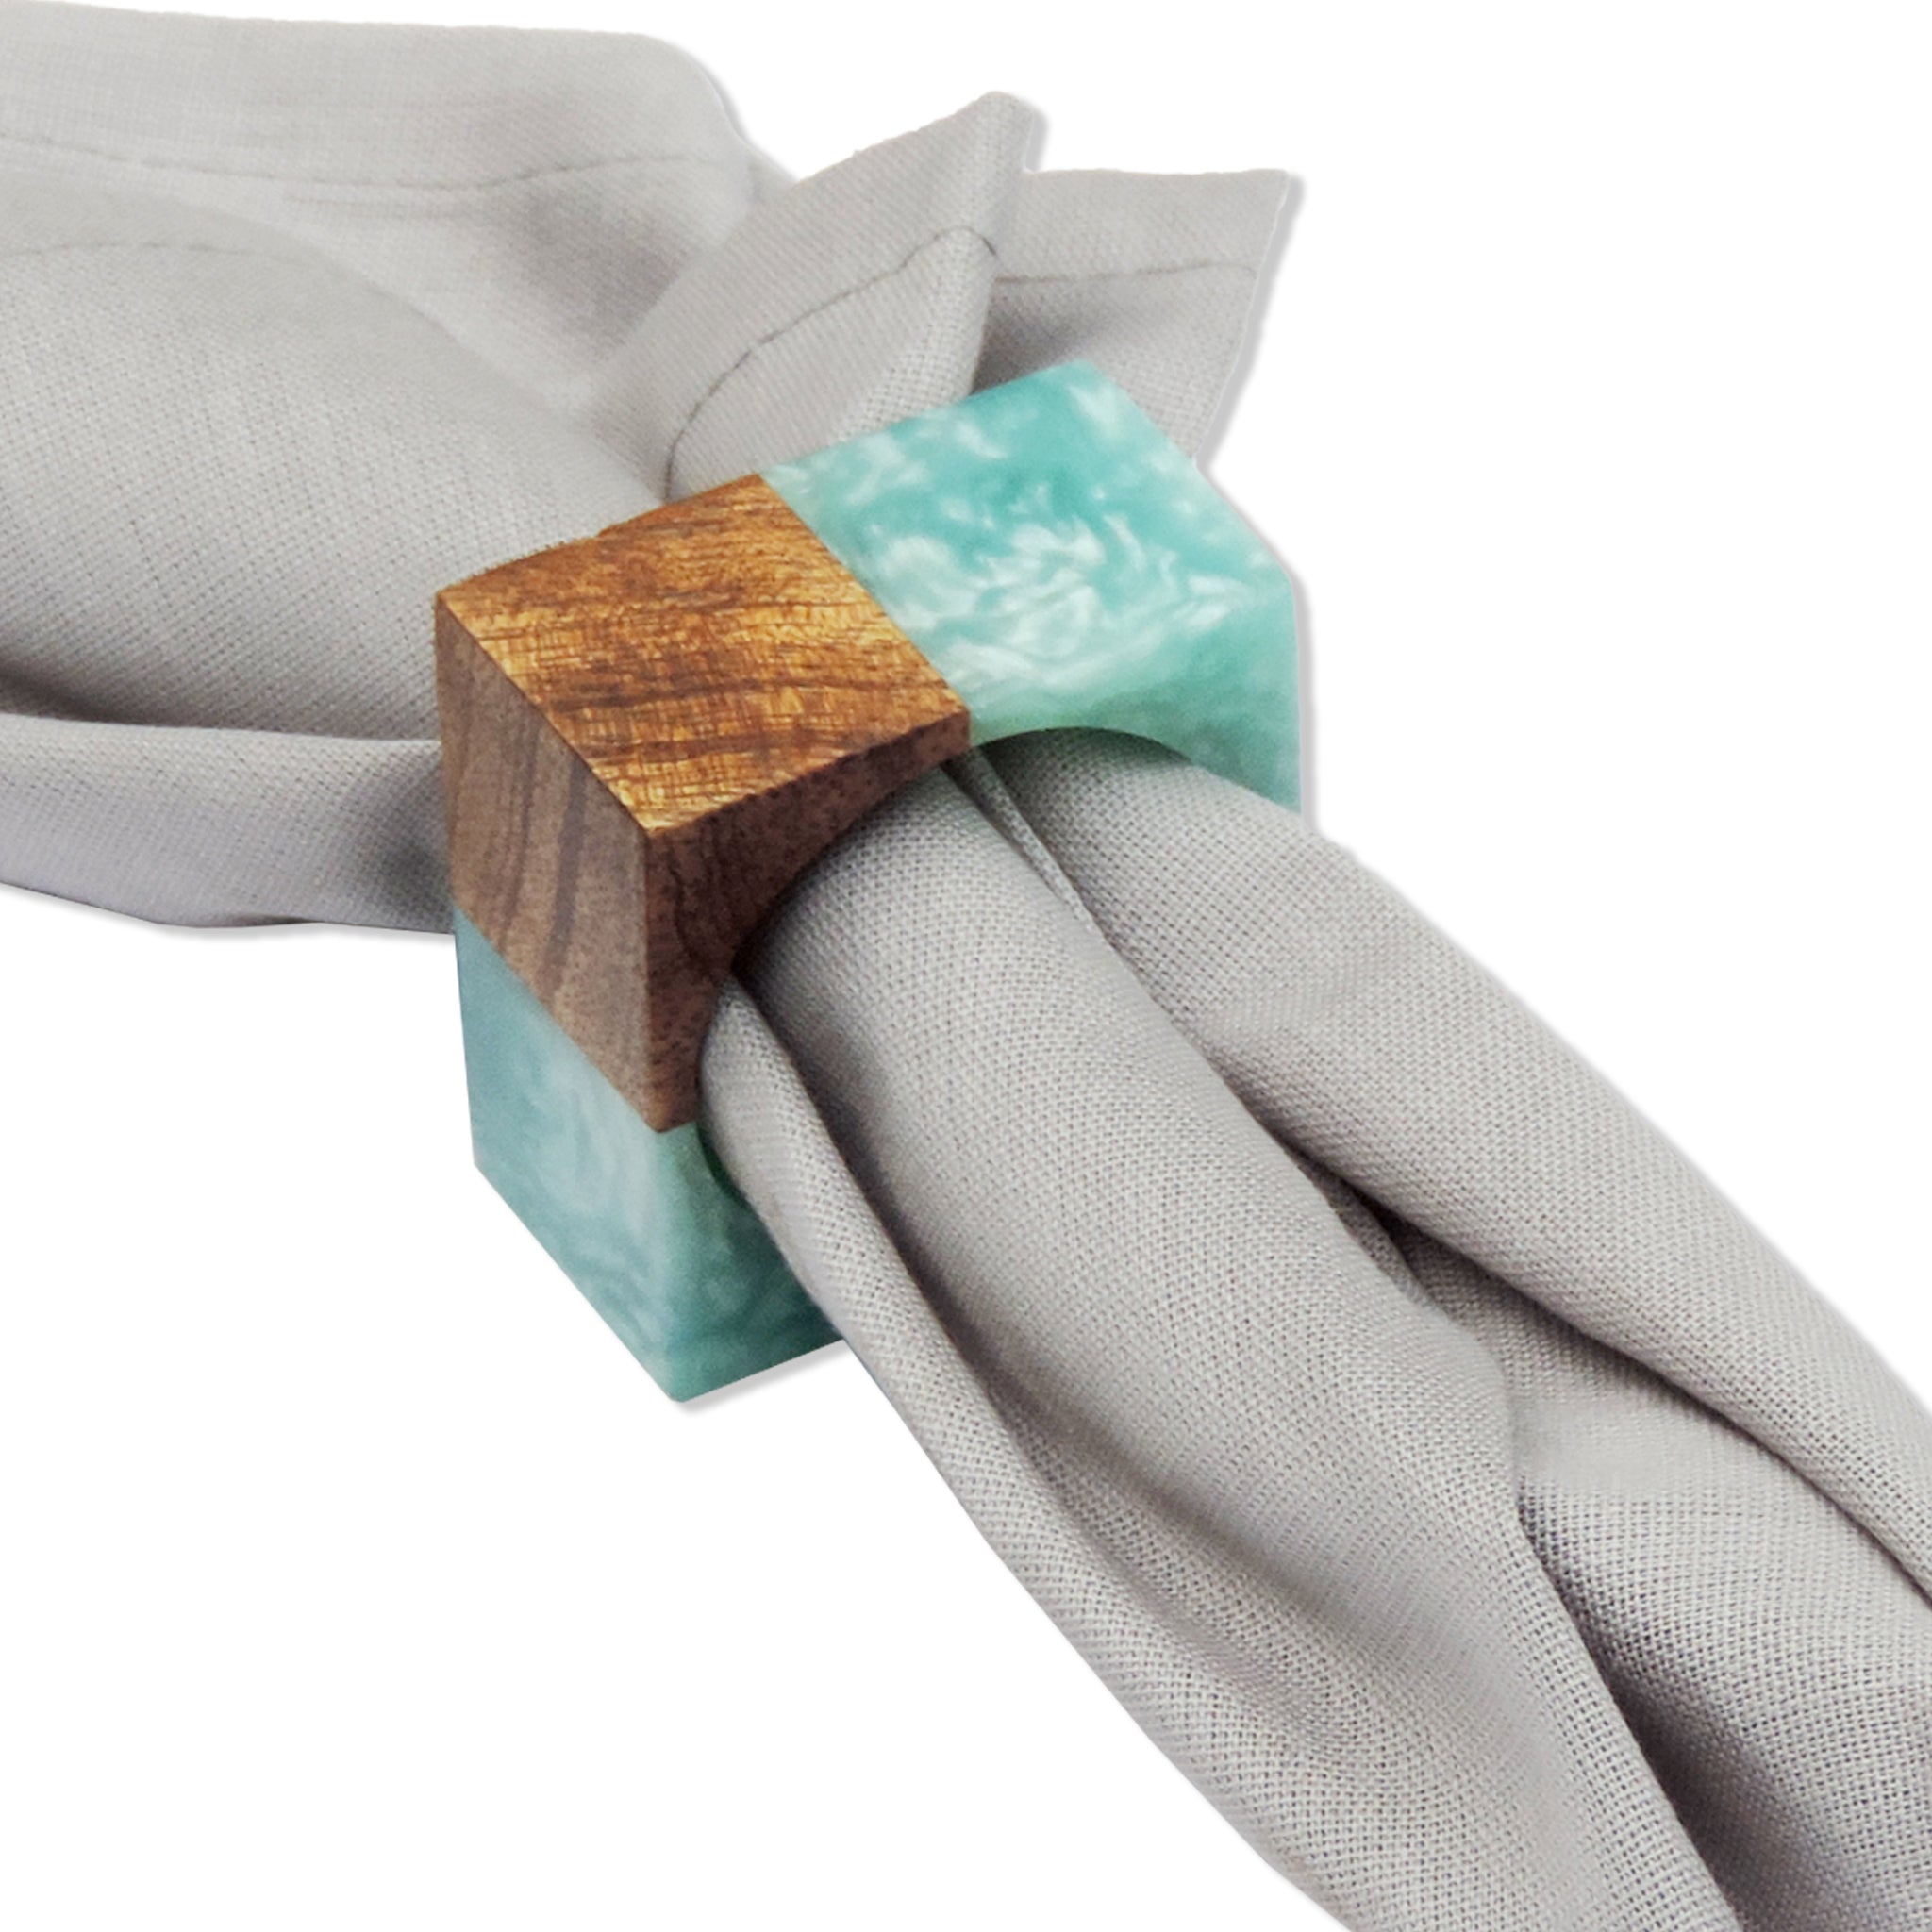 Linen by Trunkin'/ Wood with resin Napkin Ring Set of 4 / Aqua/ 2"*2"